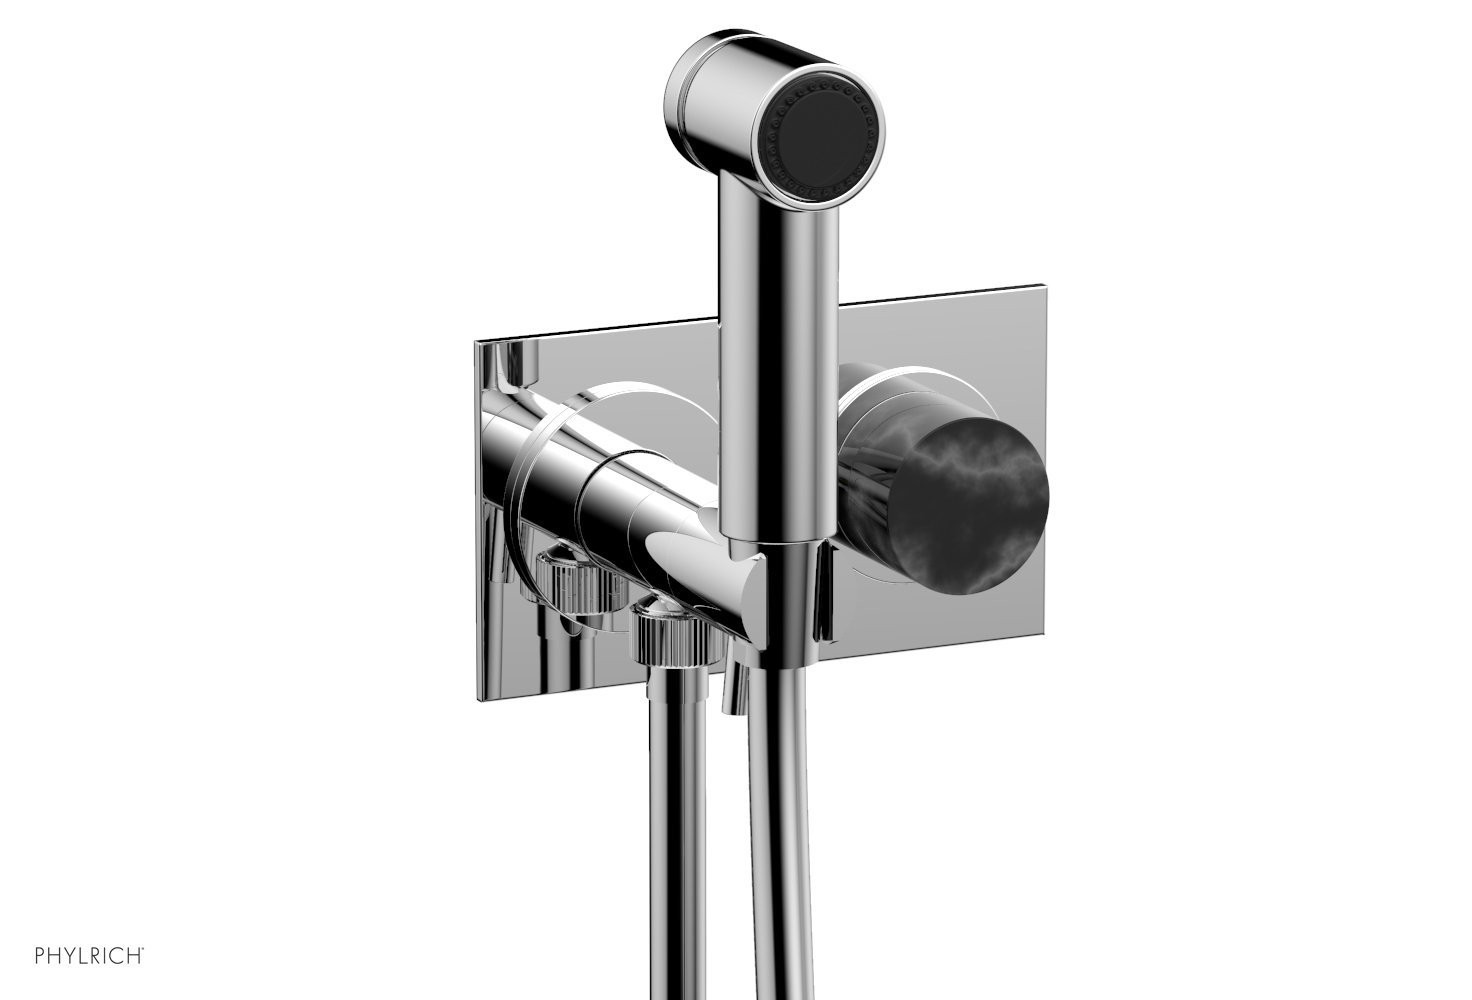 PHYLRICH 230-67-030 BASIC II TWO HOLE WALL MOUNT BIDET FAUCET WITH BLACK MARBLE LEVER HANDLE